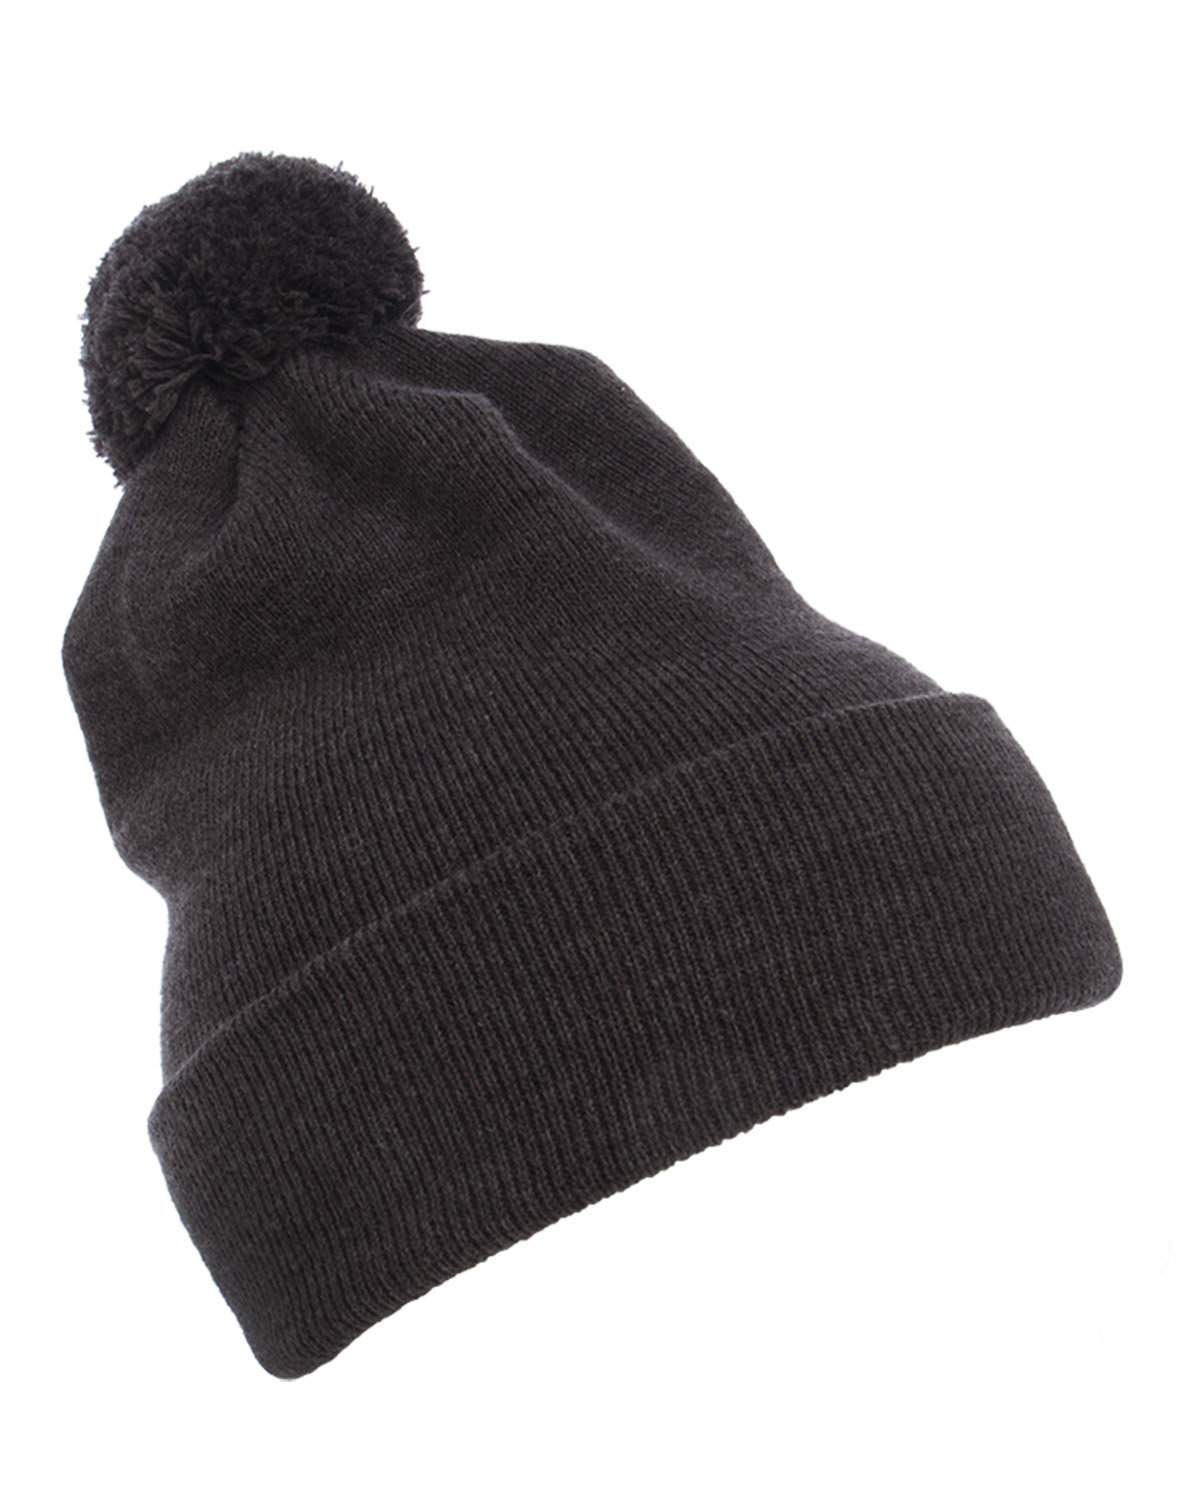 Yupoong Cuffed Pom | Pom Beanie Hat Knit with alphabroder